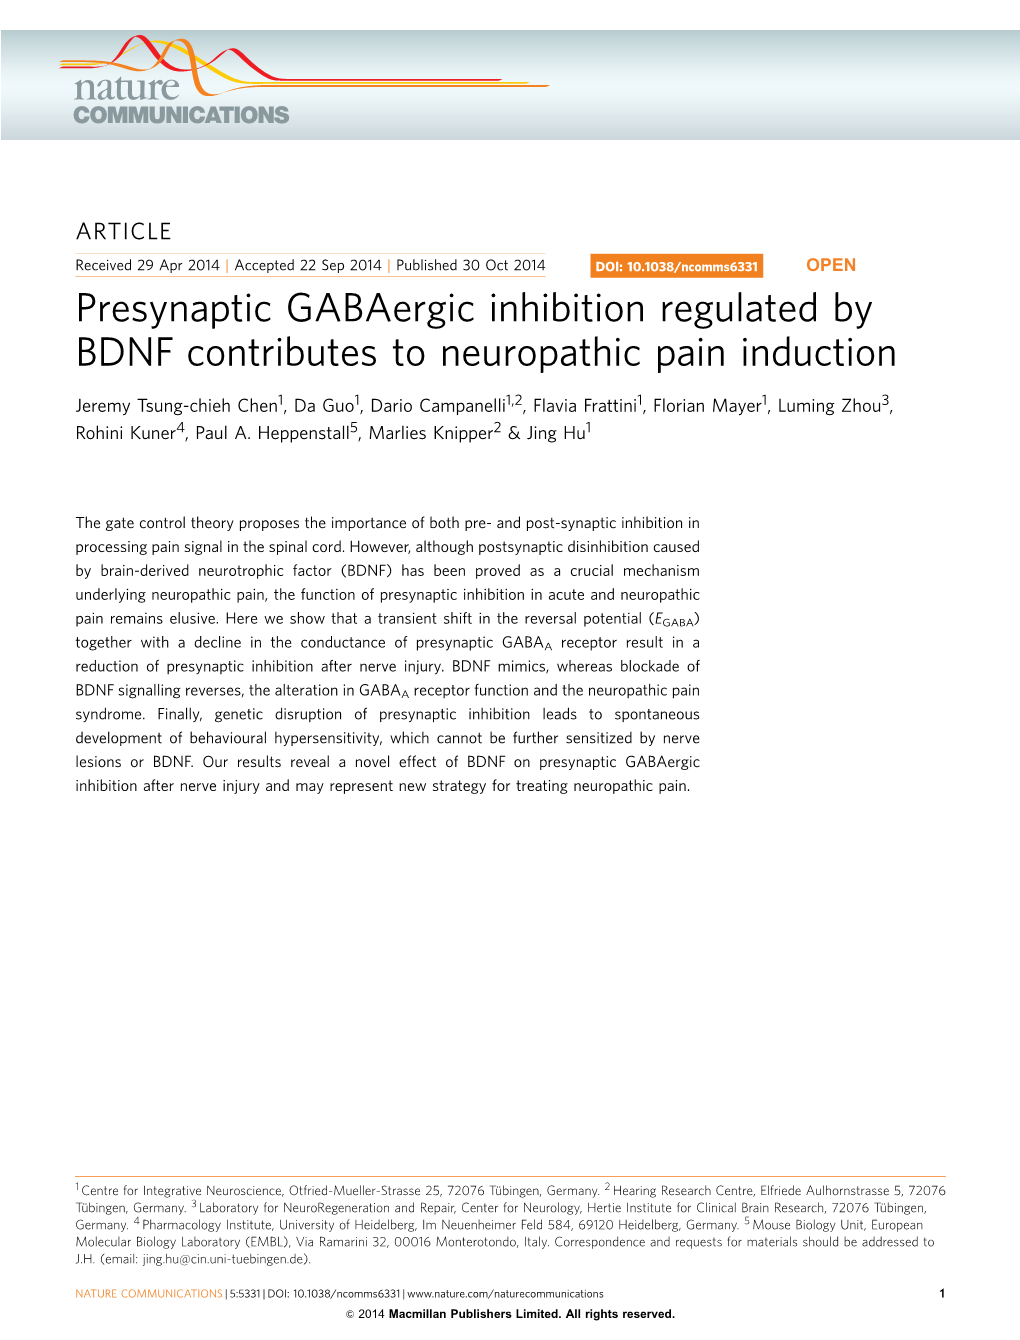 Presynaptic Gabaergic Inhibition Regulated by BDNF Contributes to Neuropathic Pain Induction